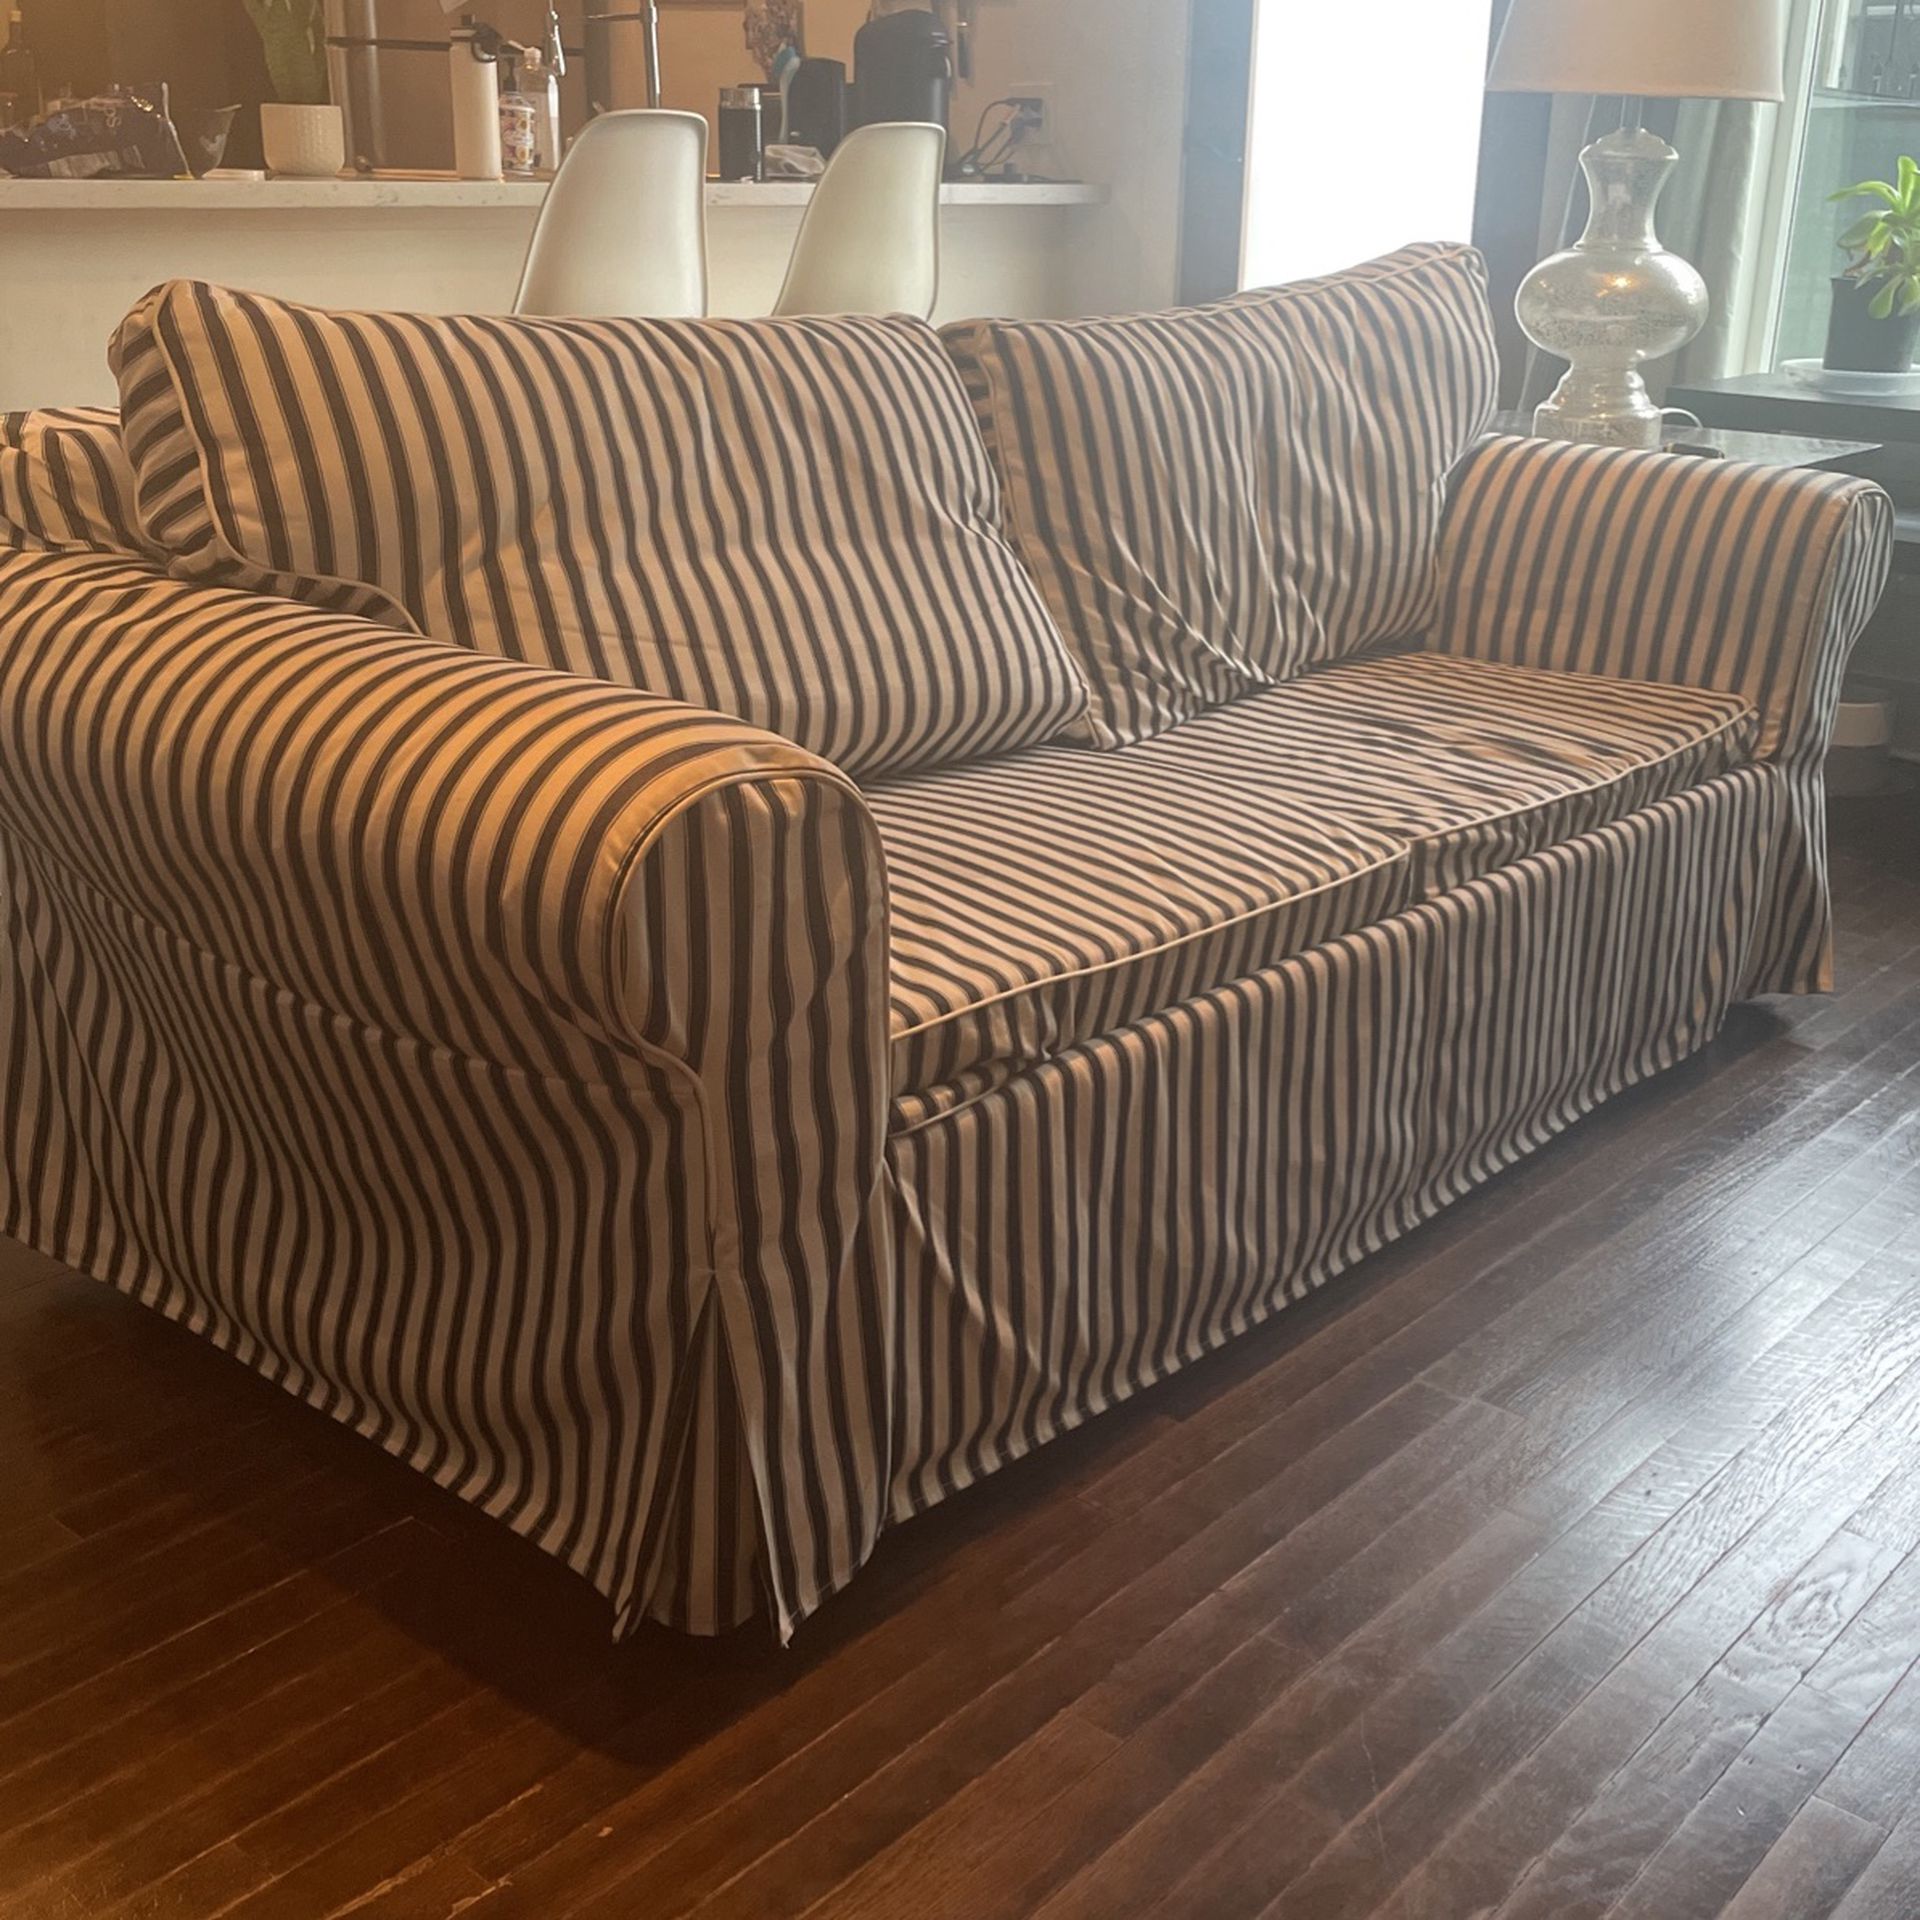 Striped Couch - Sofa Bed W/ Full Size Mattress